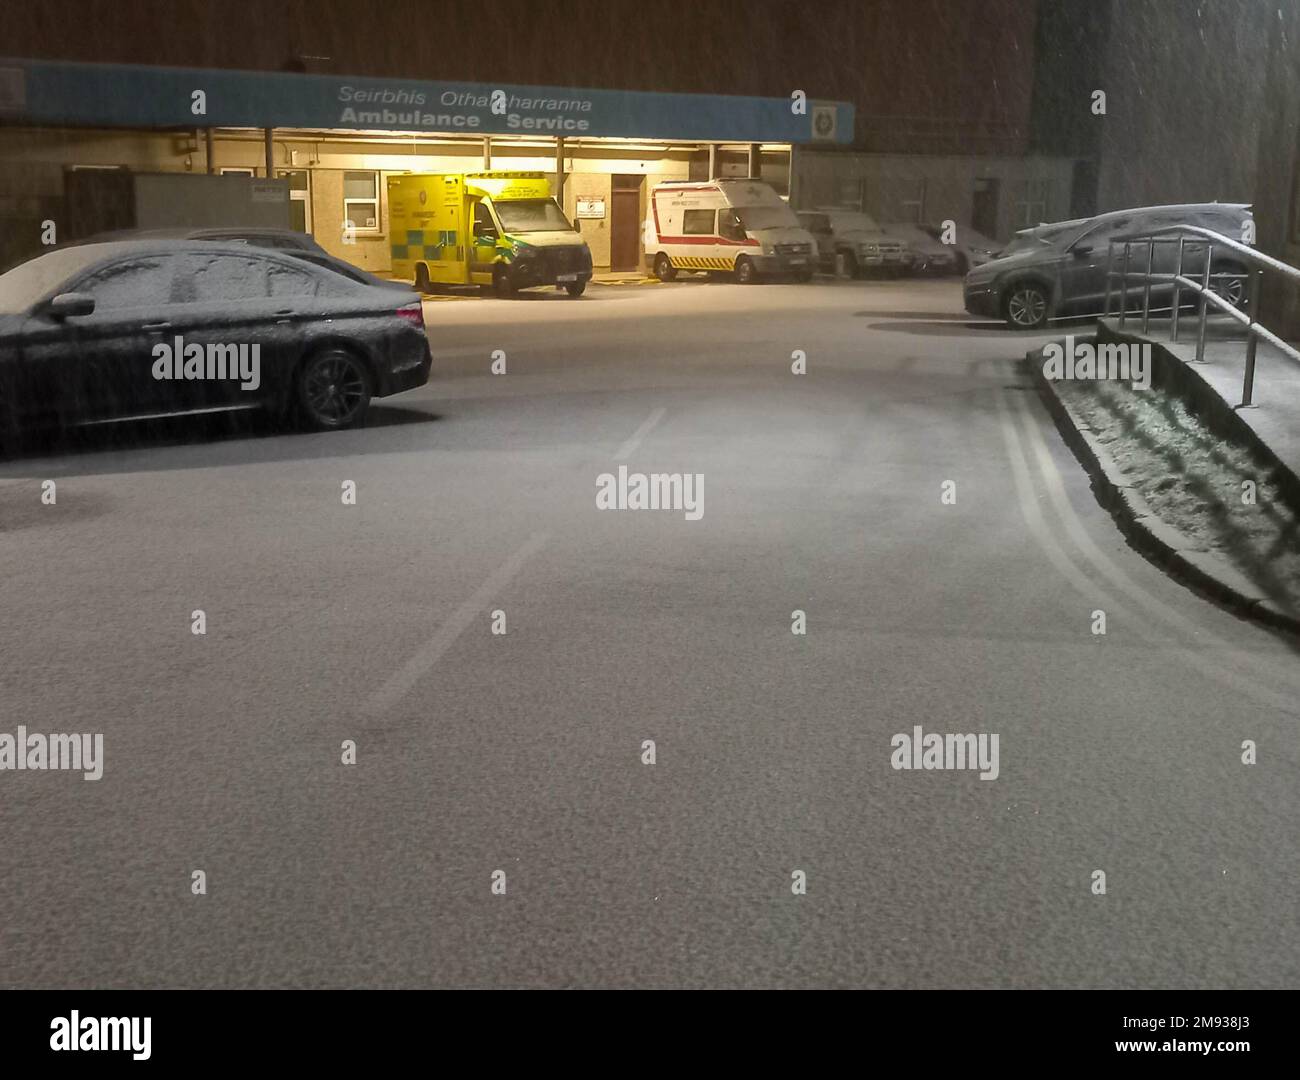 Bantry, West Cork, Ireland, Monday 16 Jan 2023; Light snow fell in Bantry this evening.  It stuck to the ground making driving conditions hazardous. People where reminded to use dipped headlights and to keep extra distance to the car in Front. Snow on the ground at Bantry Ambulance Base. Credit; ED/Alamy Live News Stock Photo